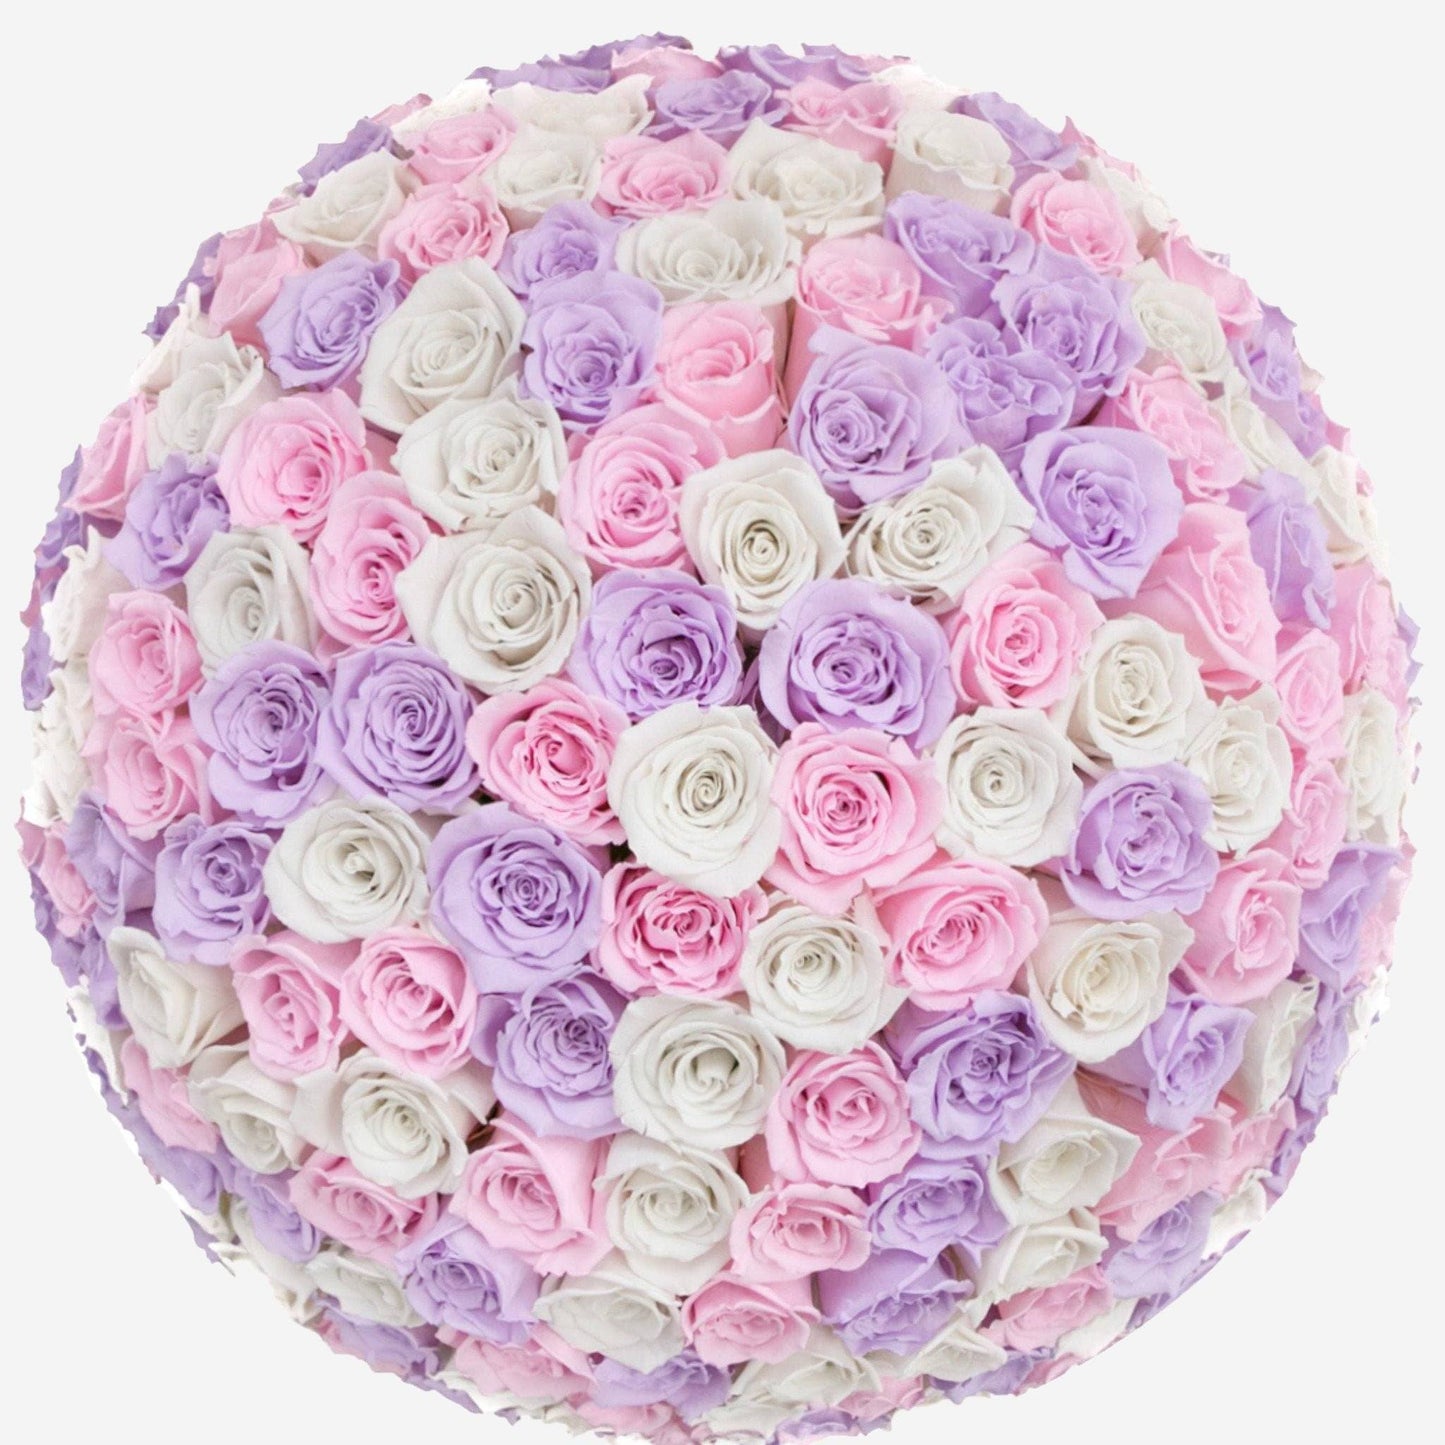 Deluxe White Dome Box | White & Pink & Lavender Roses - The Million Roses